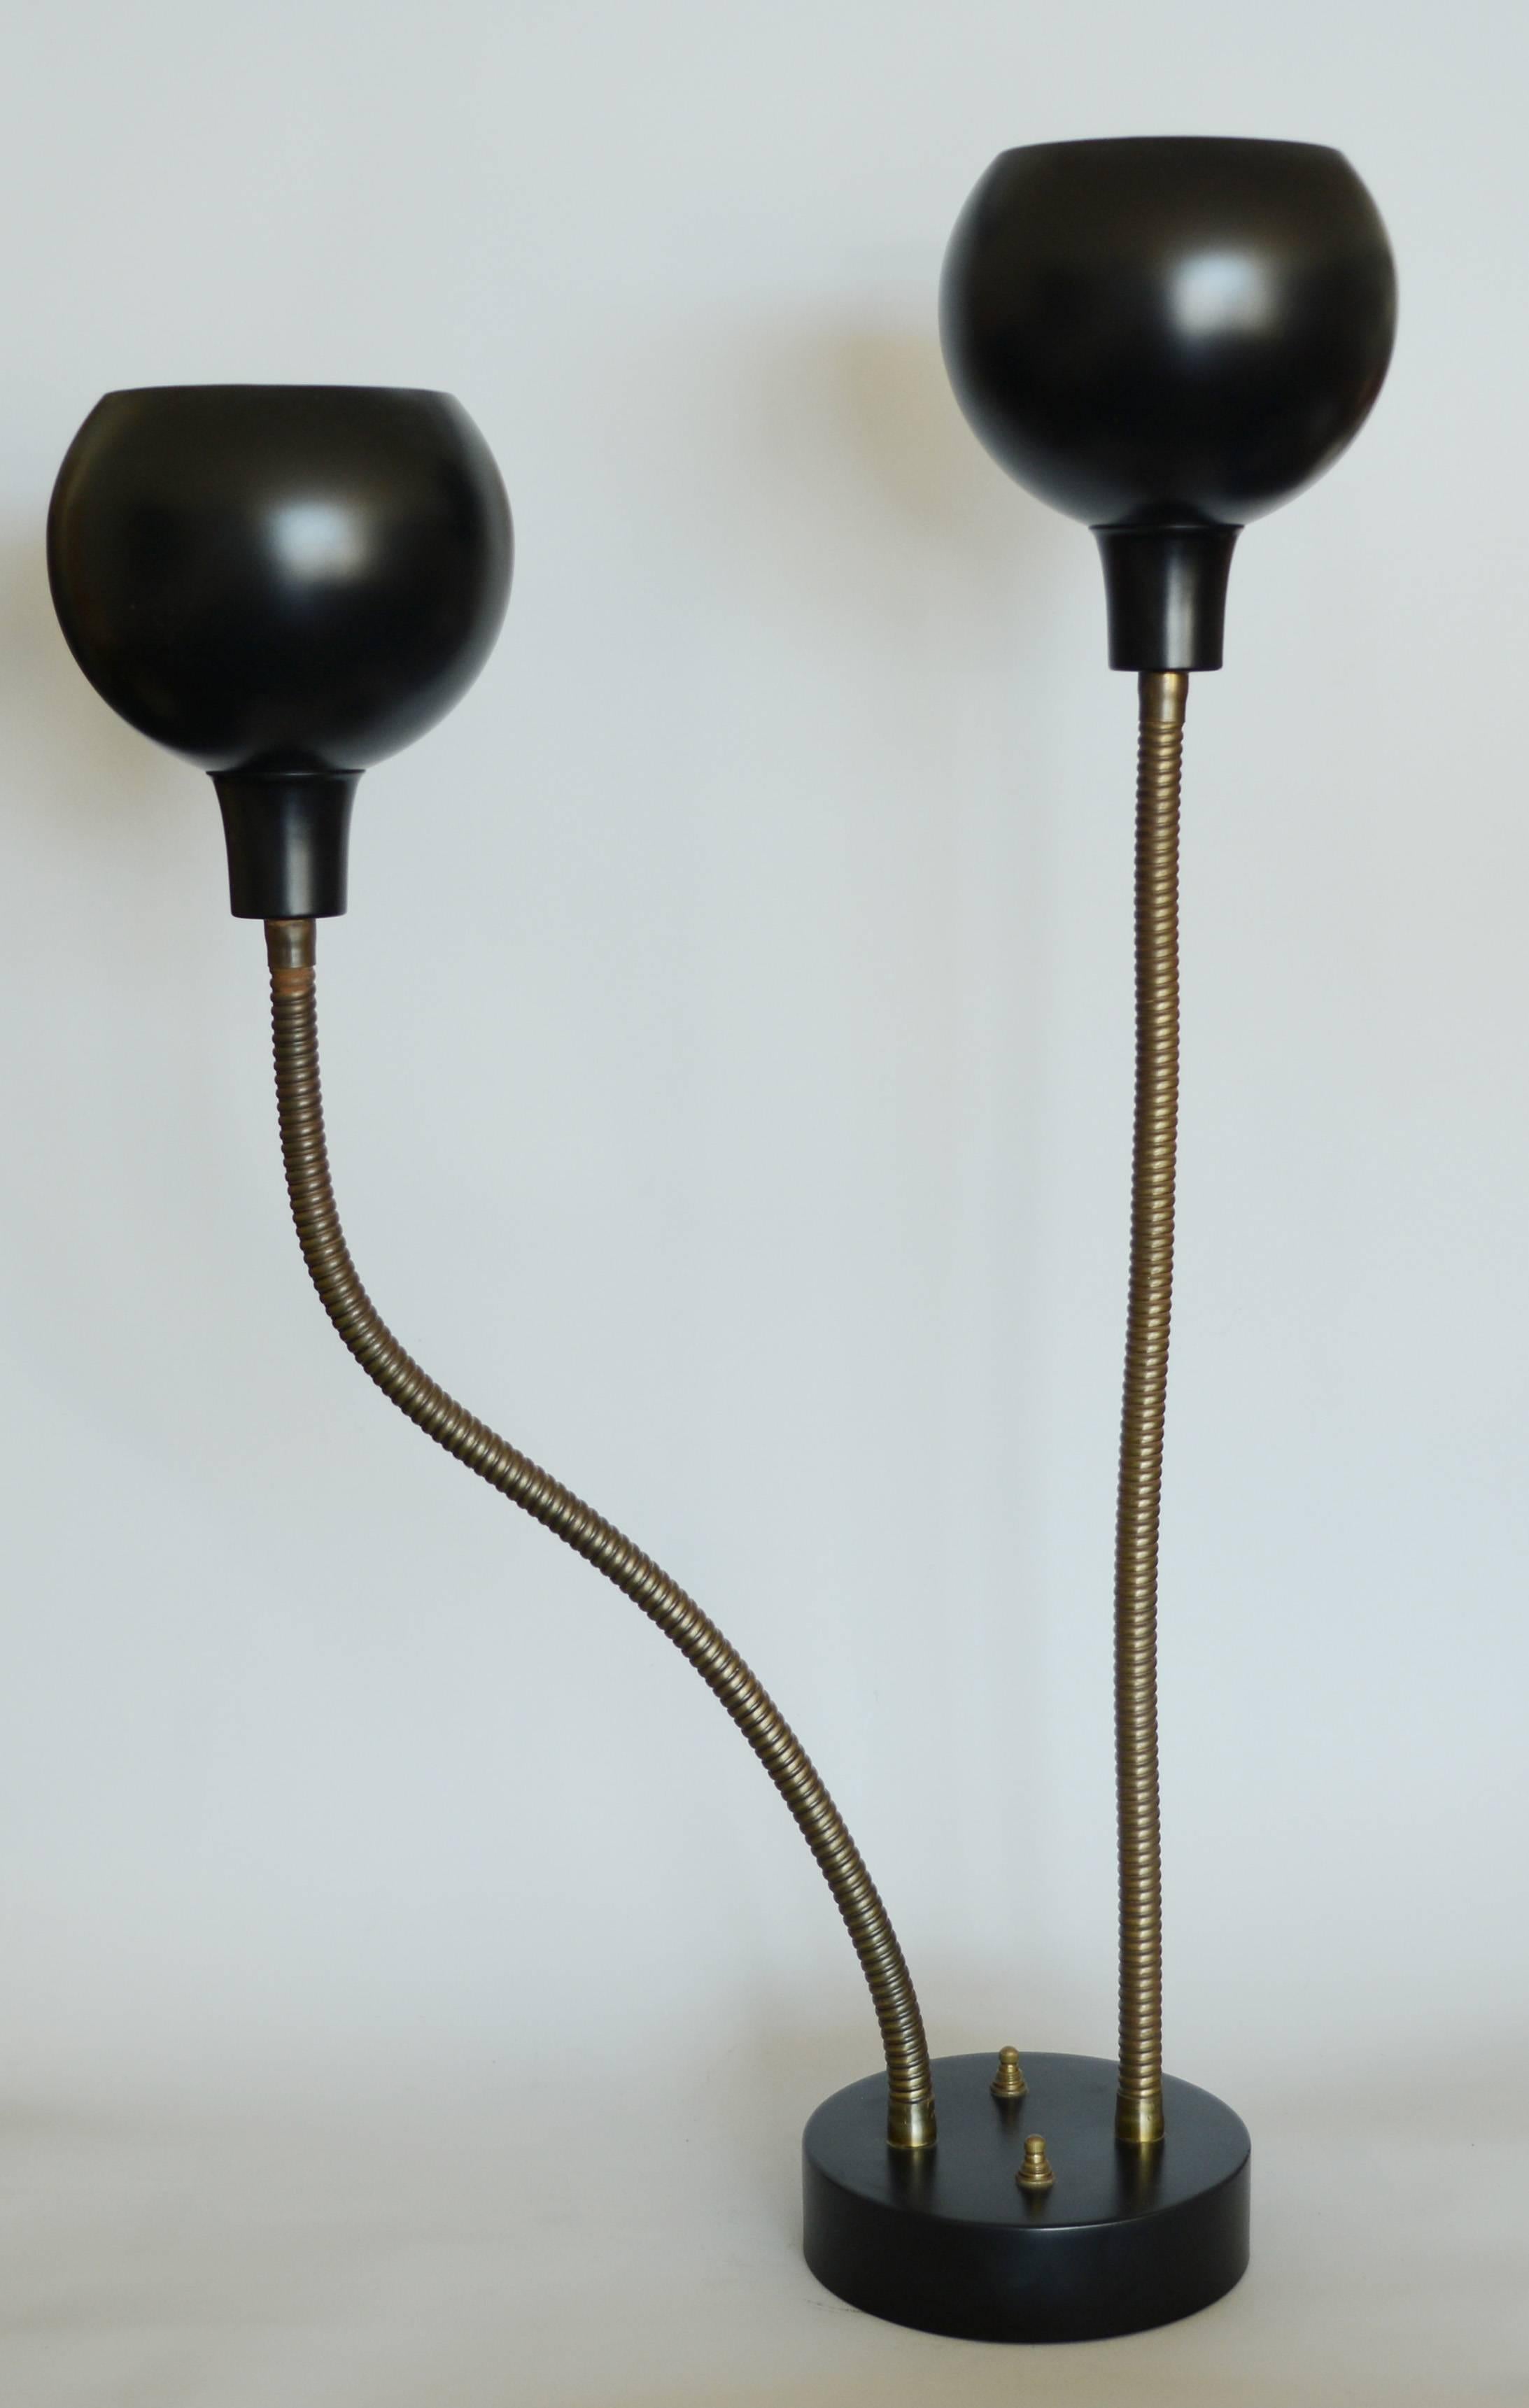 Double gooseneck table or desk lamp. The two spherical shades can be positioned any number of ways.